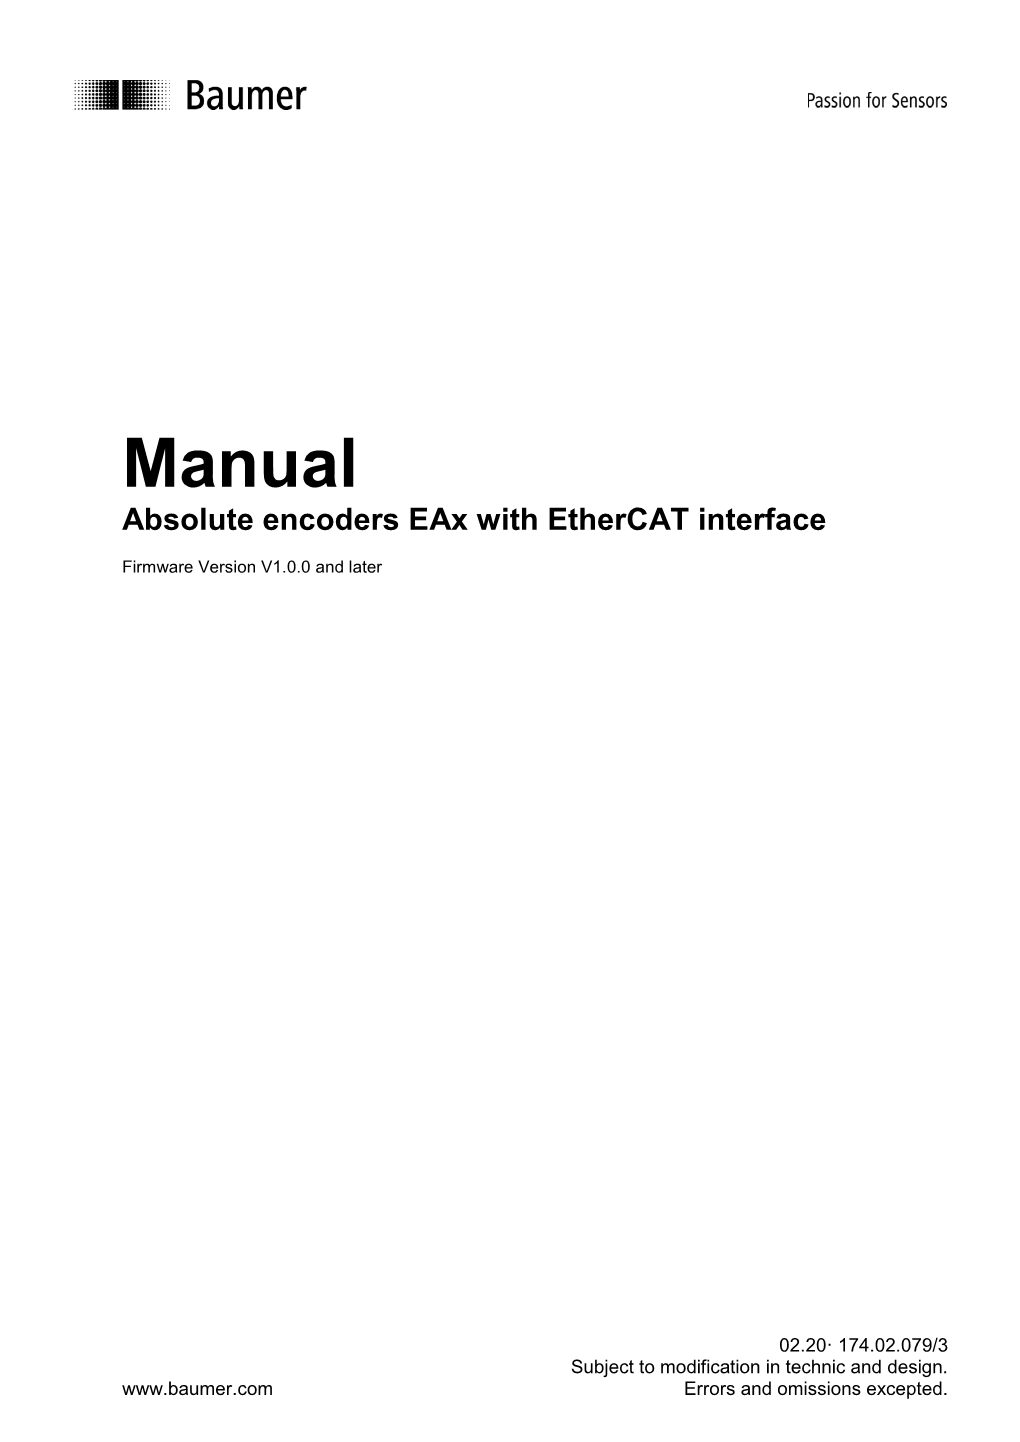 Manual Absolute Encoders Eax with Ethercat Interface